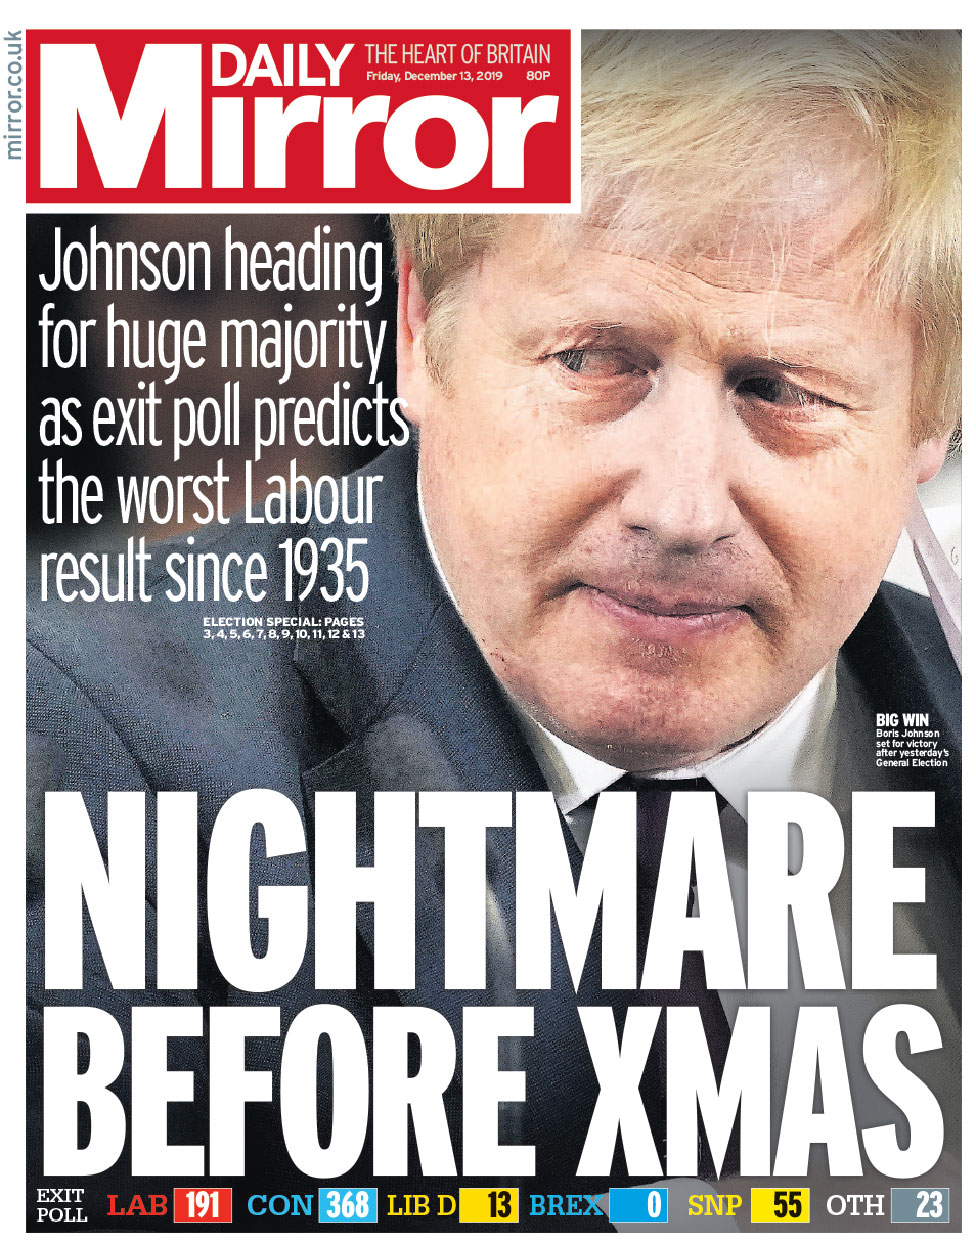 The Daily Mirror front page